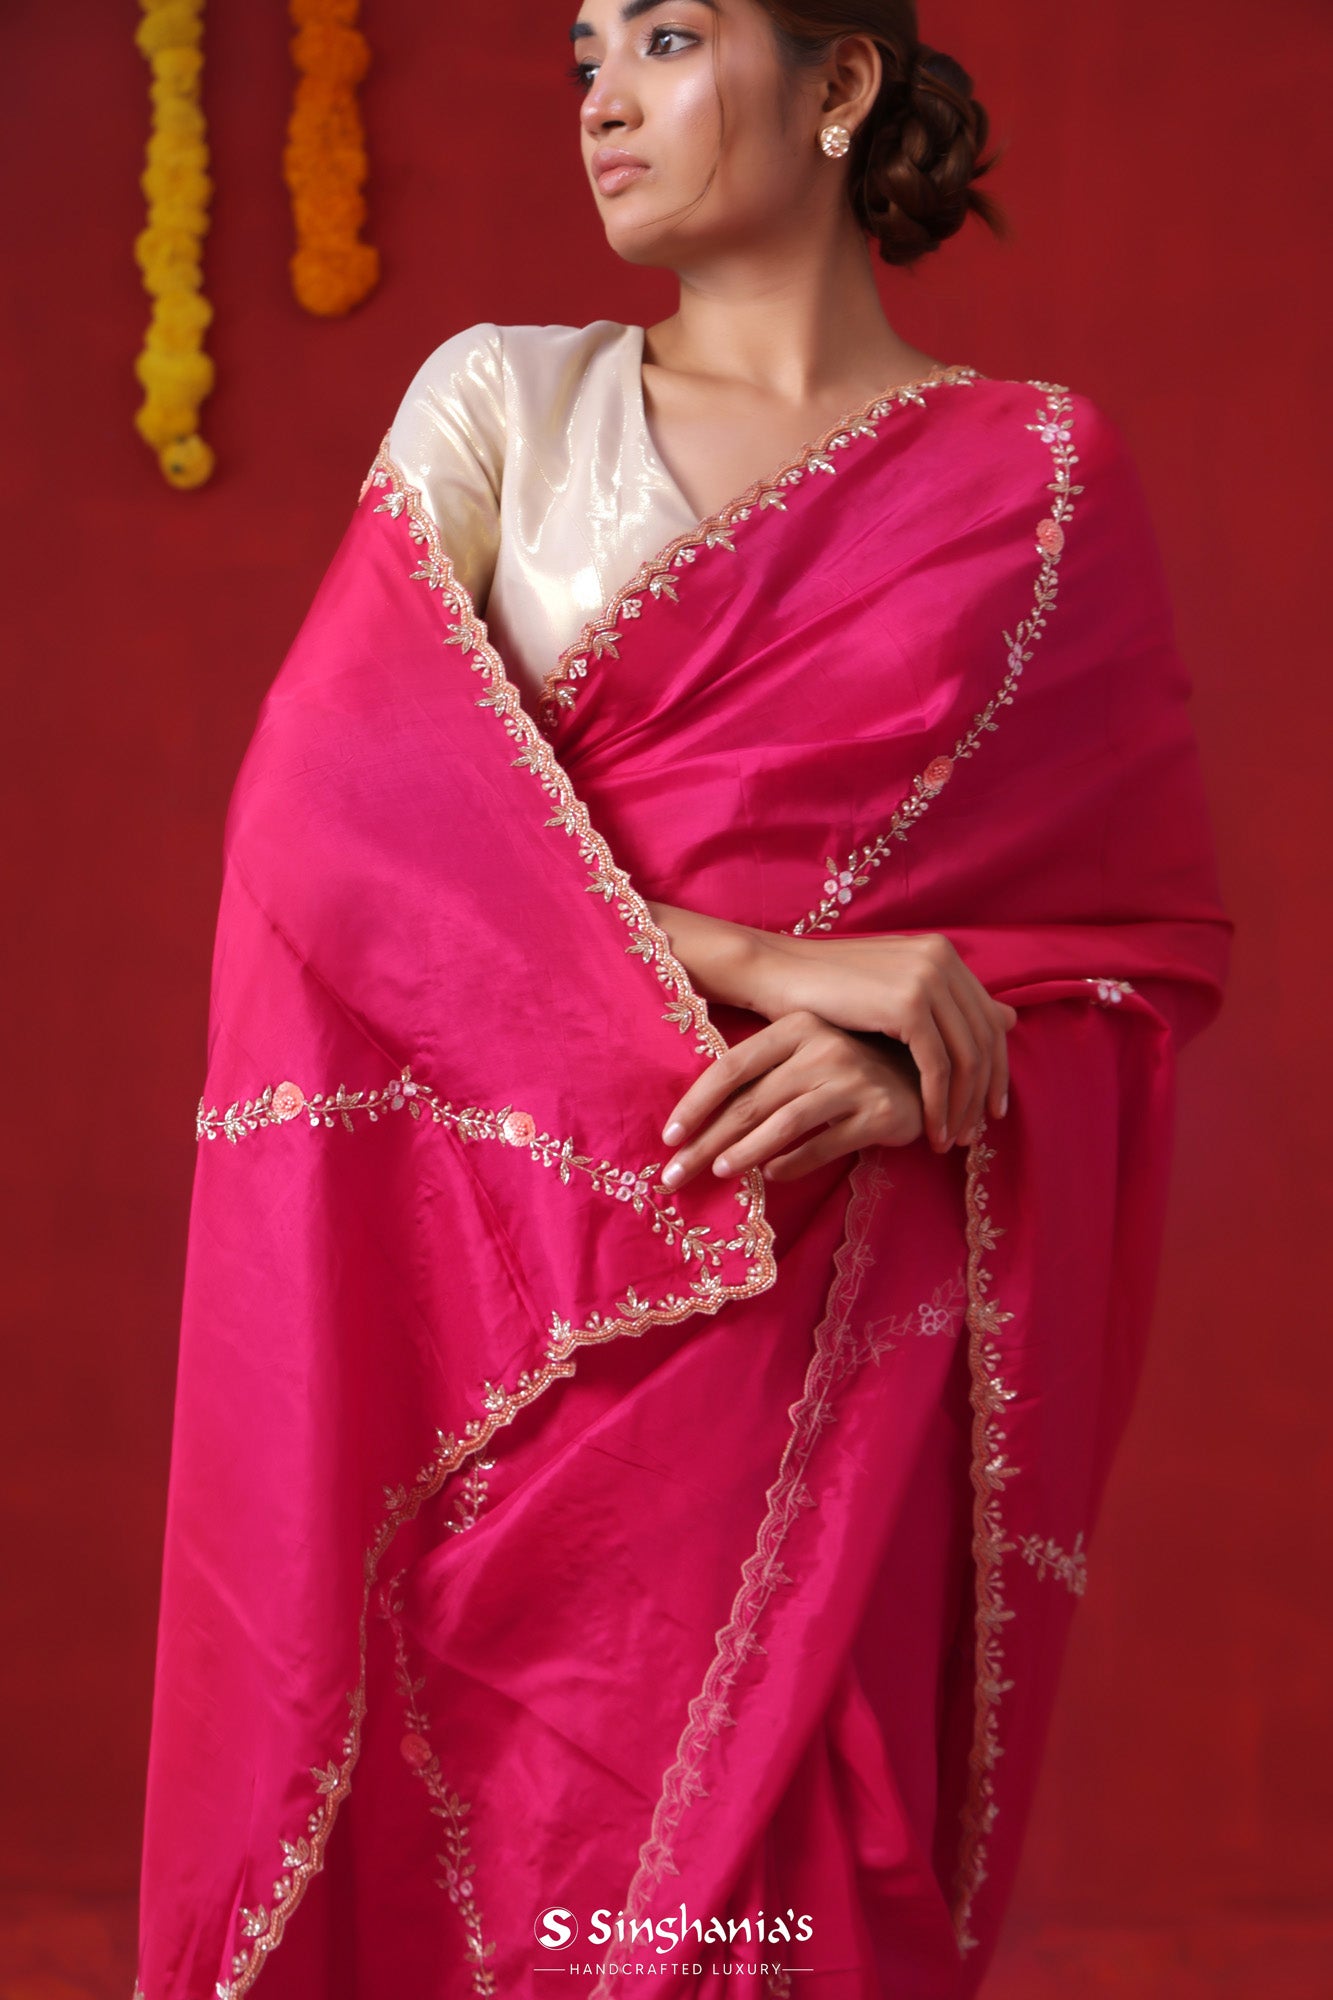 Ruby Pink Modal Satin Saree With Floral Embroidery